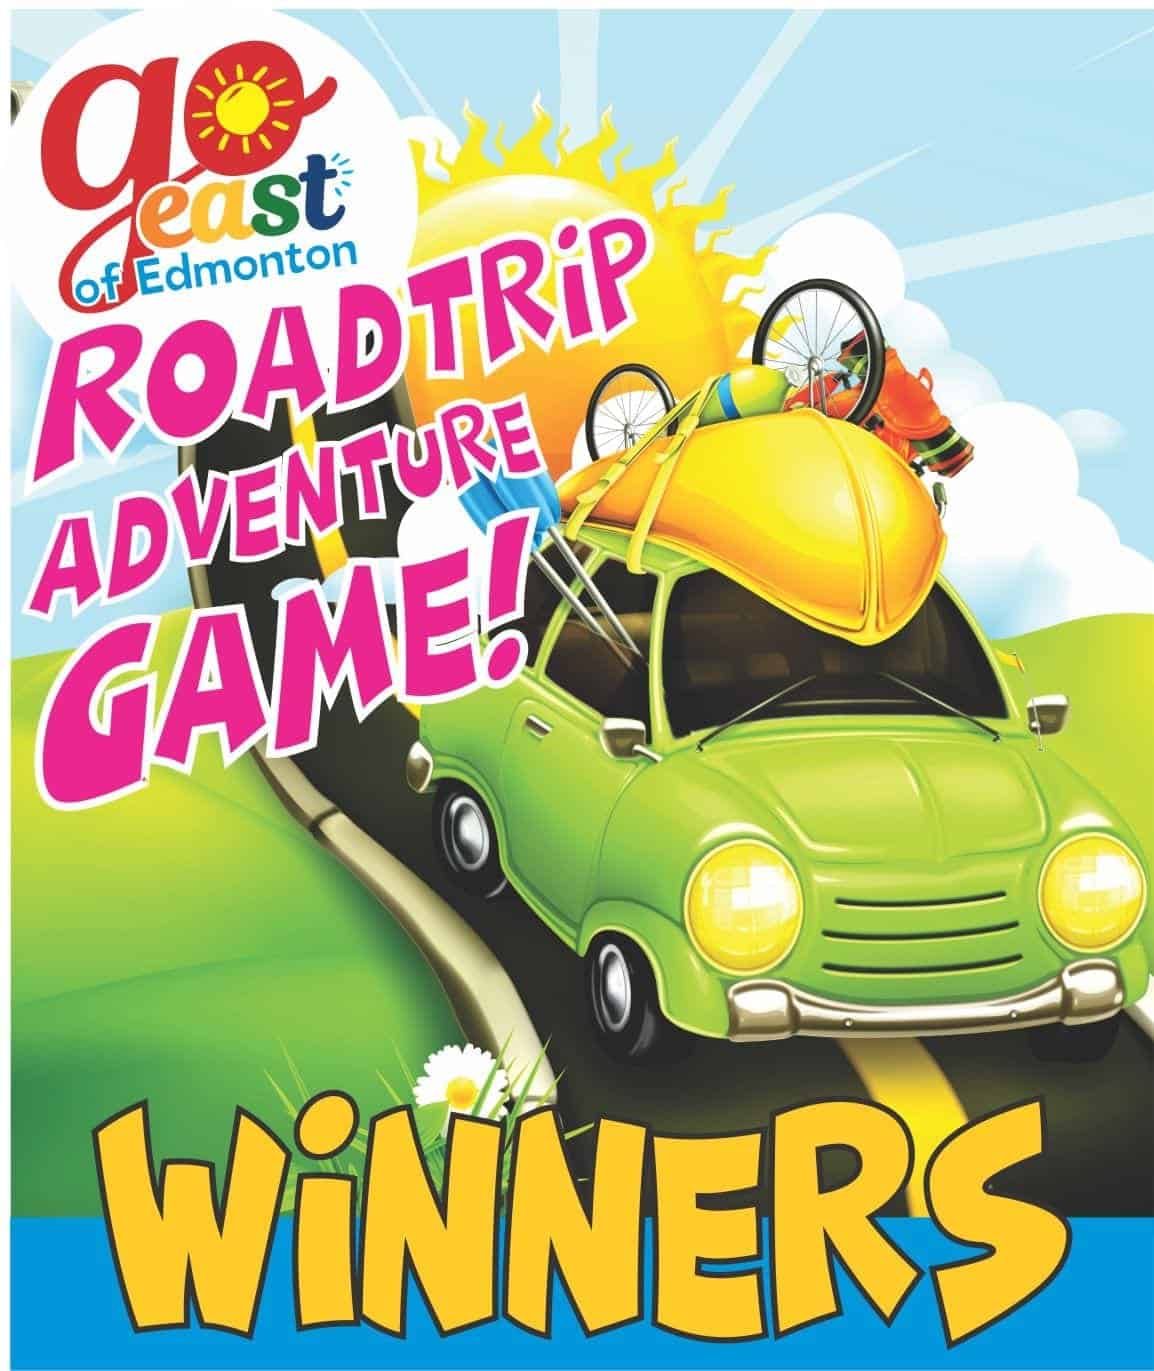 Featured Image for “Winners of the 2021 Go East of Edmonton Roadtrip Adventure Game”